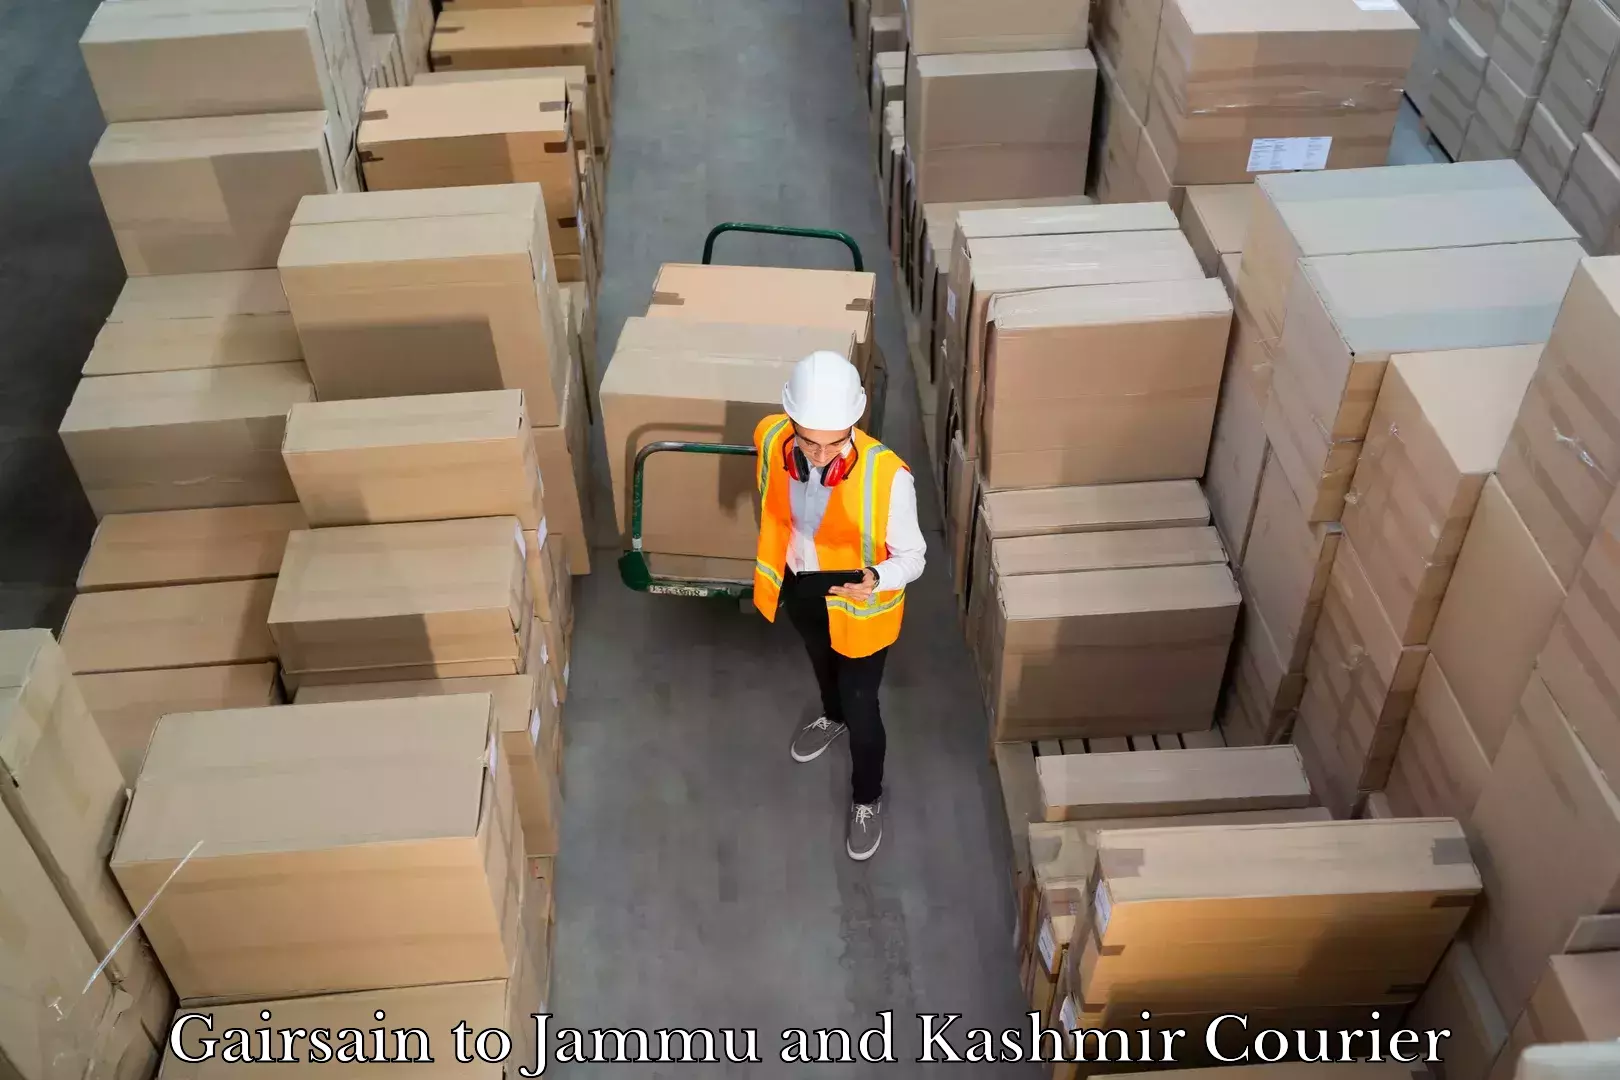 Express luggage delivery Gairsain to Jammu and Kashmir